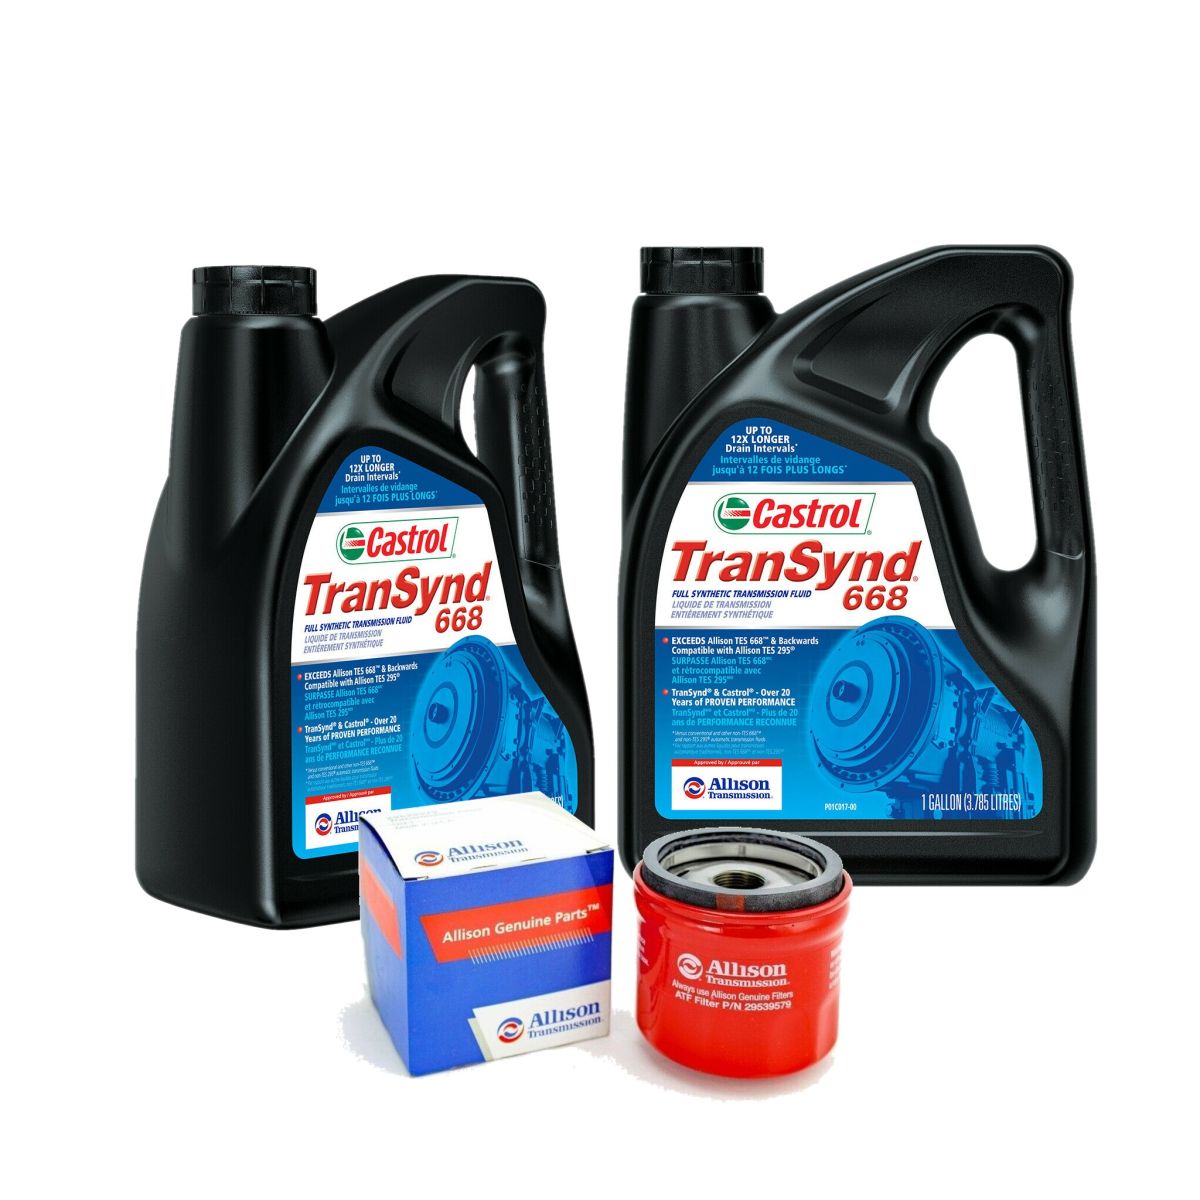 Allison Transmission - 2 Gallons Allison Transynd TES 668 Synthetic Trans Fluid/Allison Spin On Filter